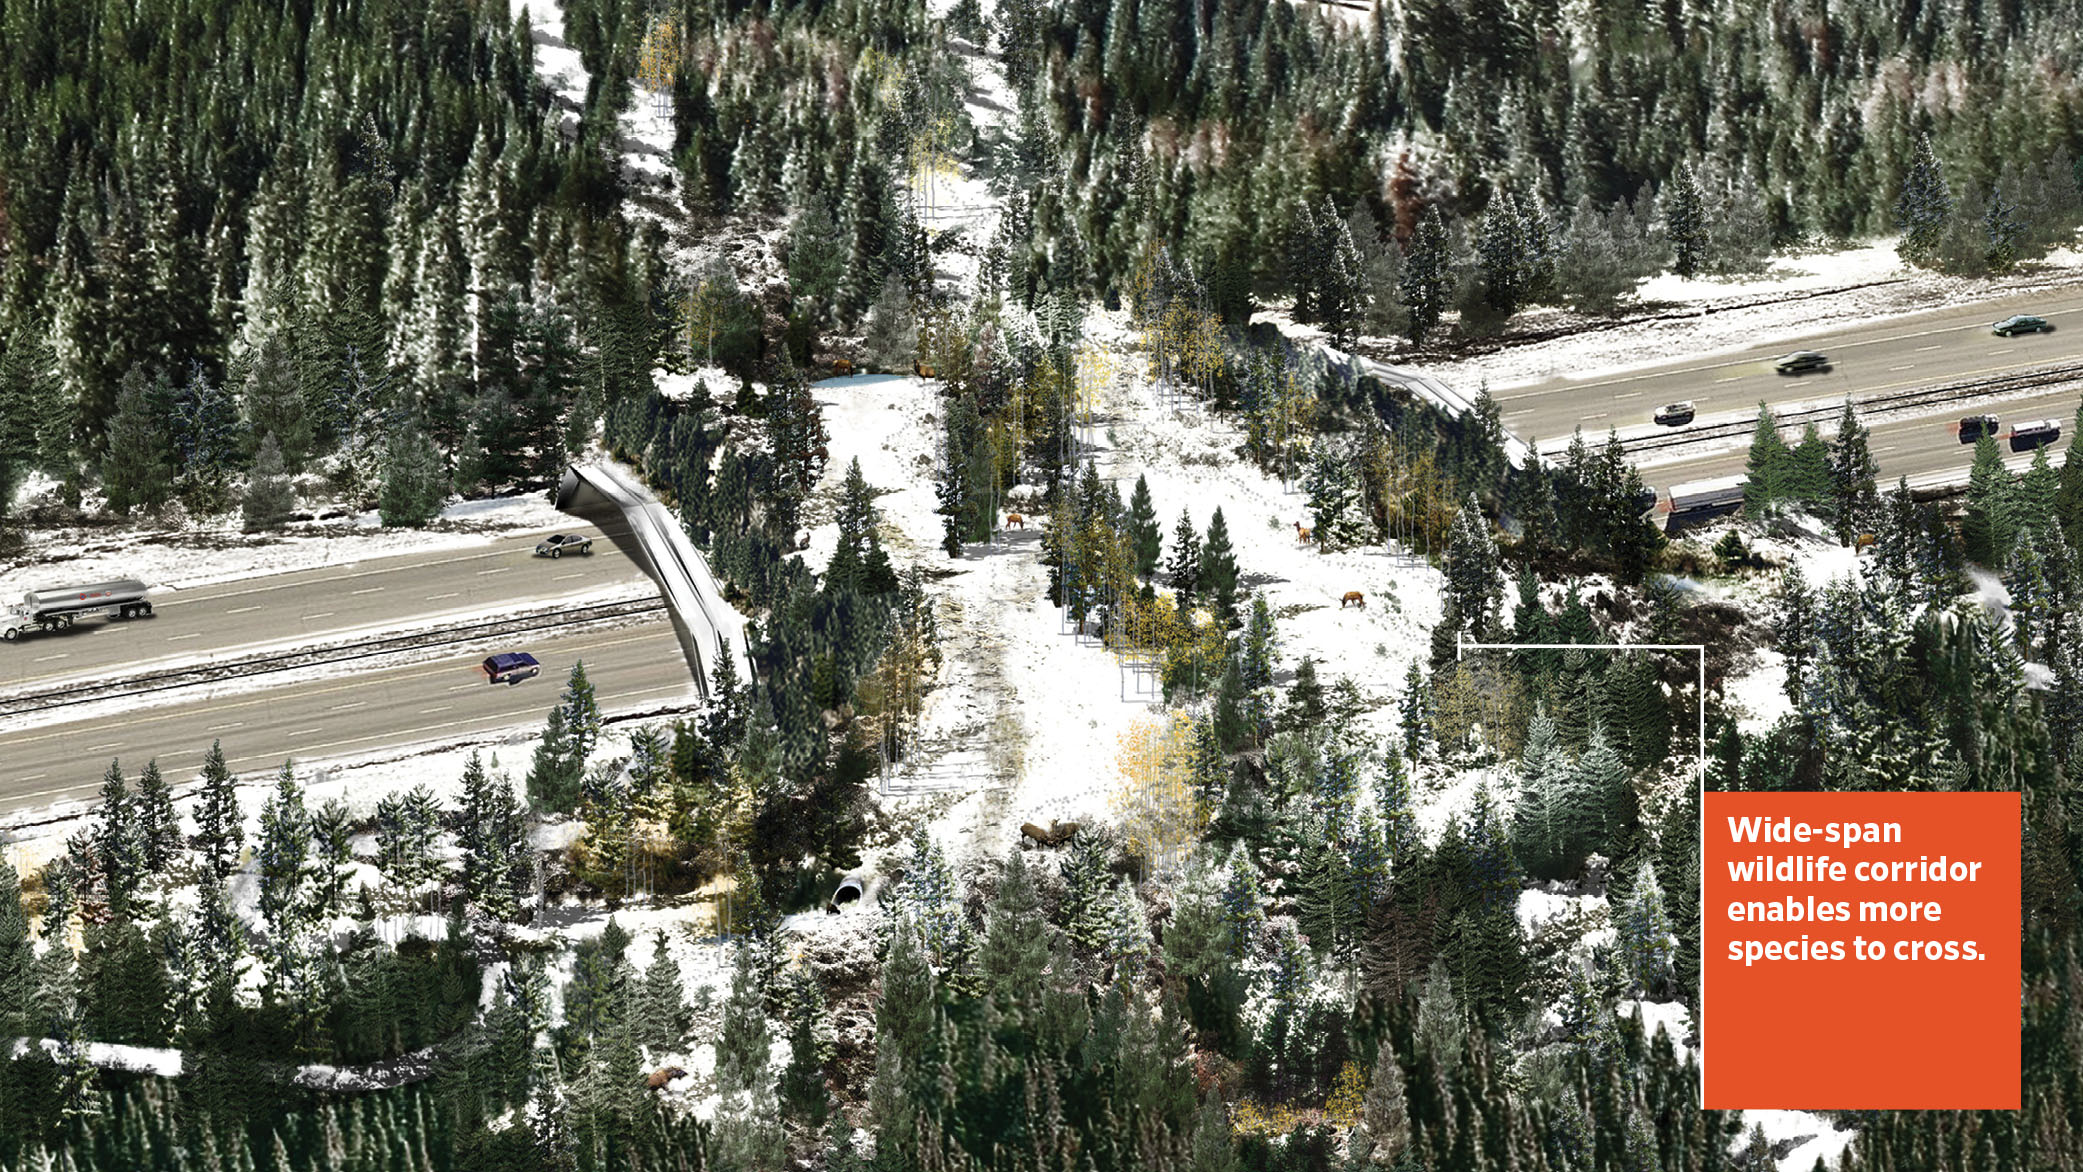 A rendering of the wide-span Hypar-Nature wildlife crossing in West Vail Pass, Colorado. The crossing covers a multi-lane highway and enables multiple species to cross in safety.